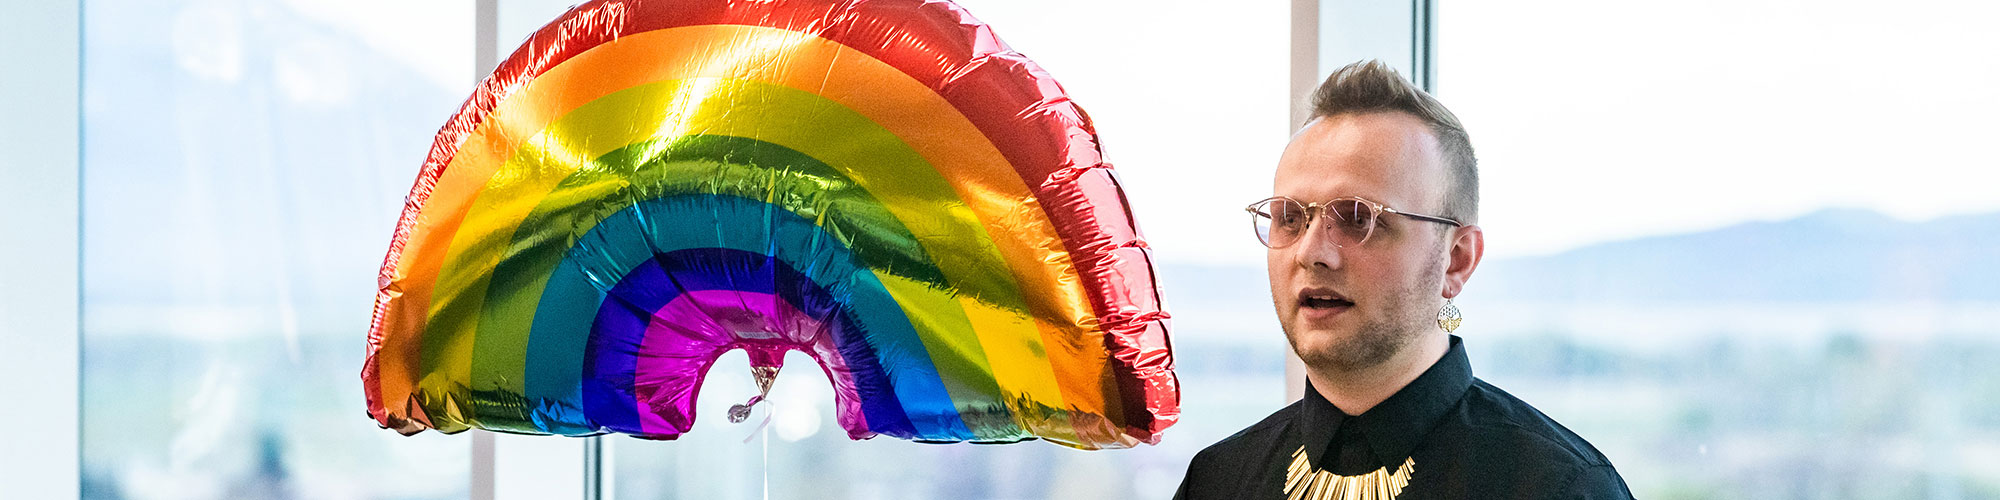 A person standing next to a rainbow balloon